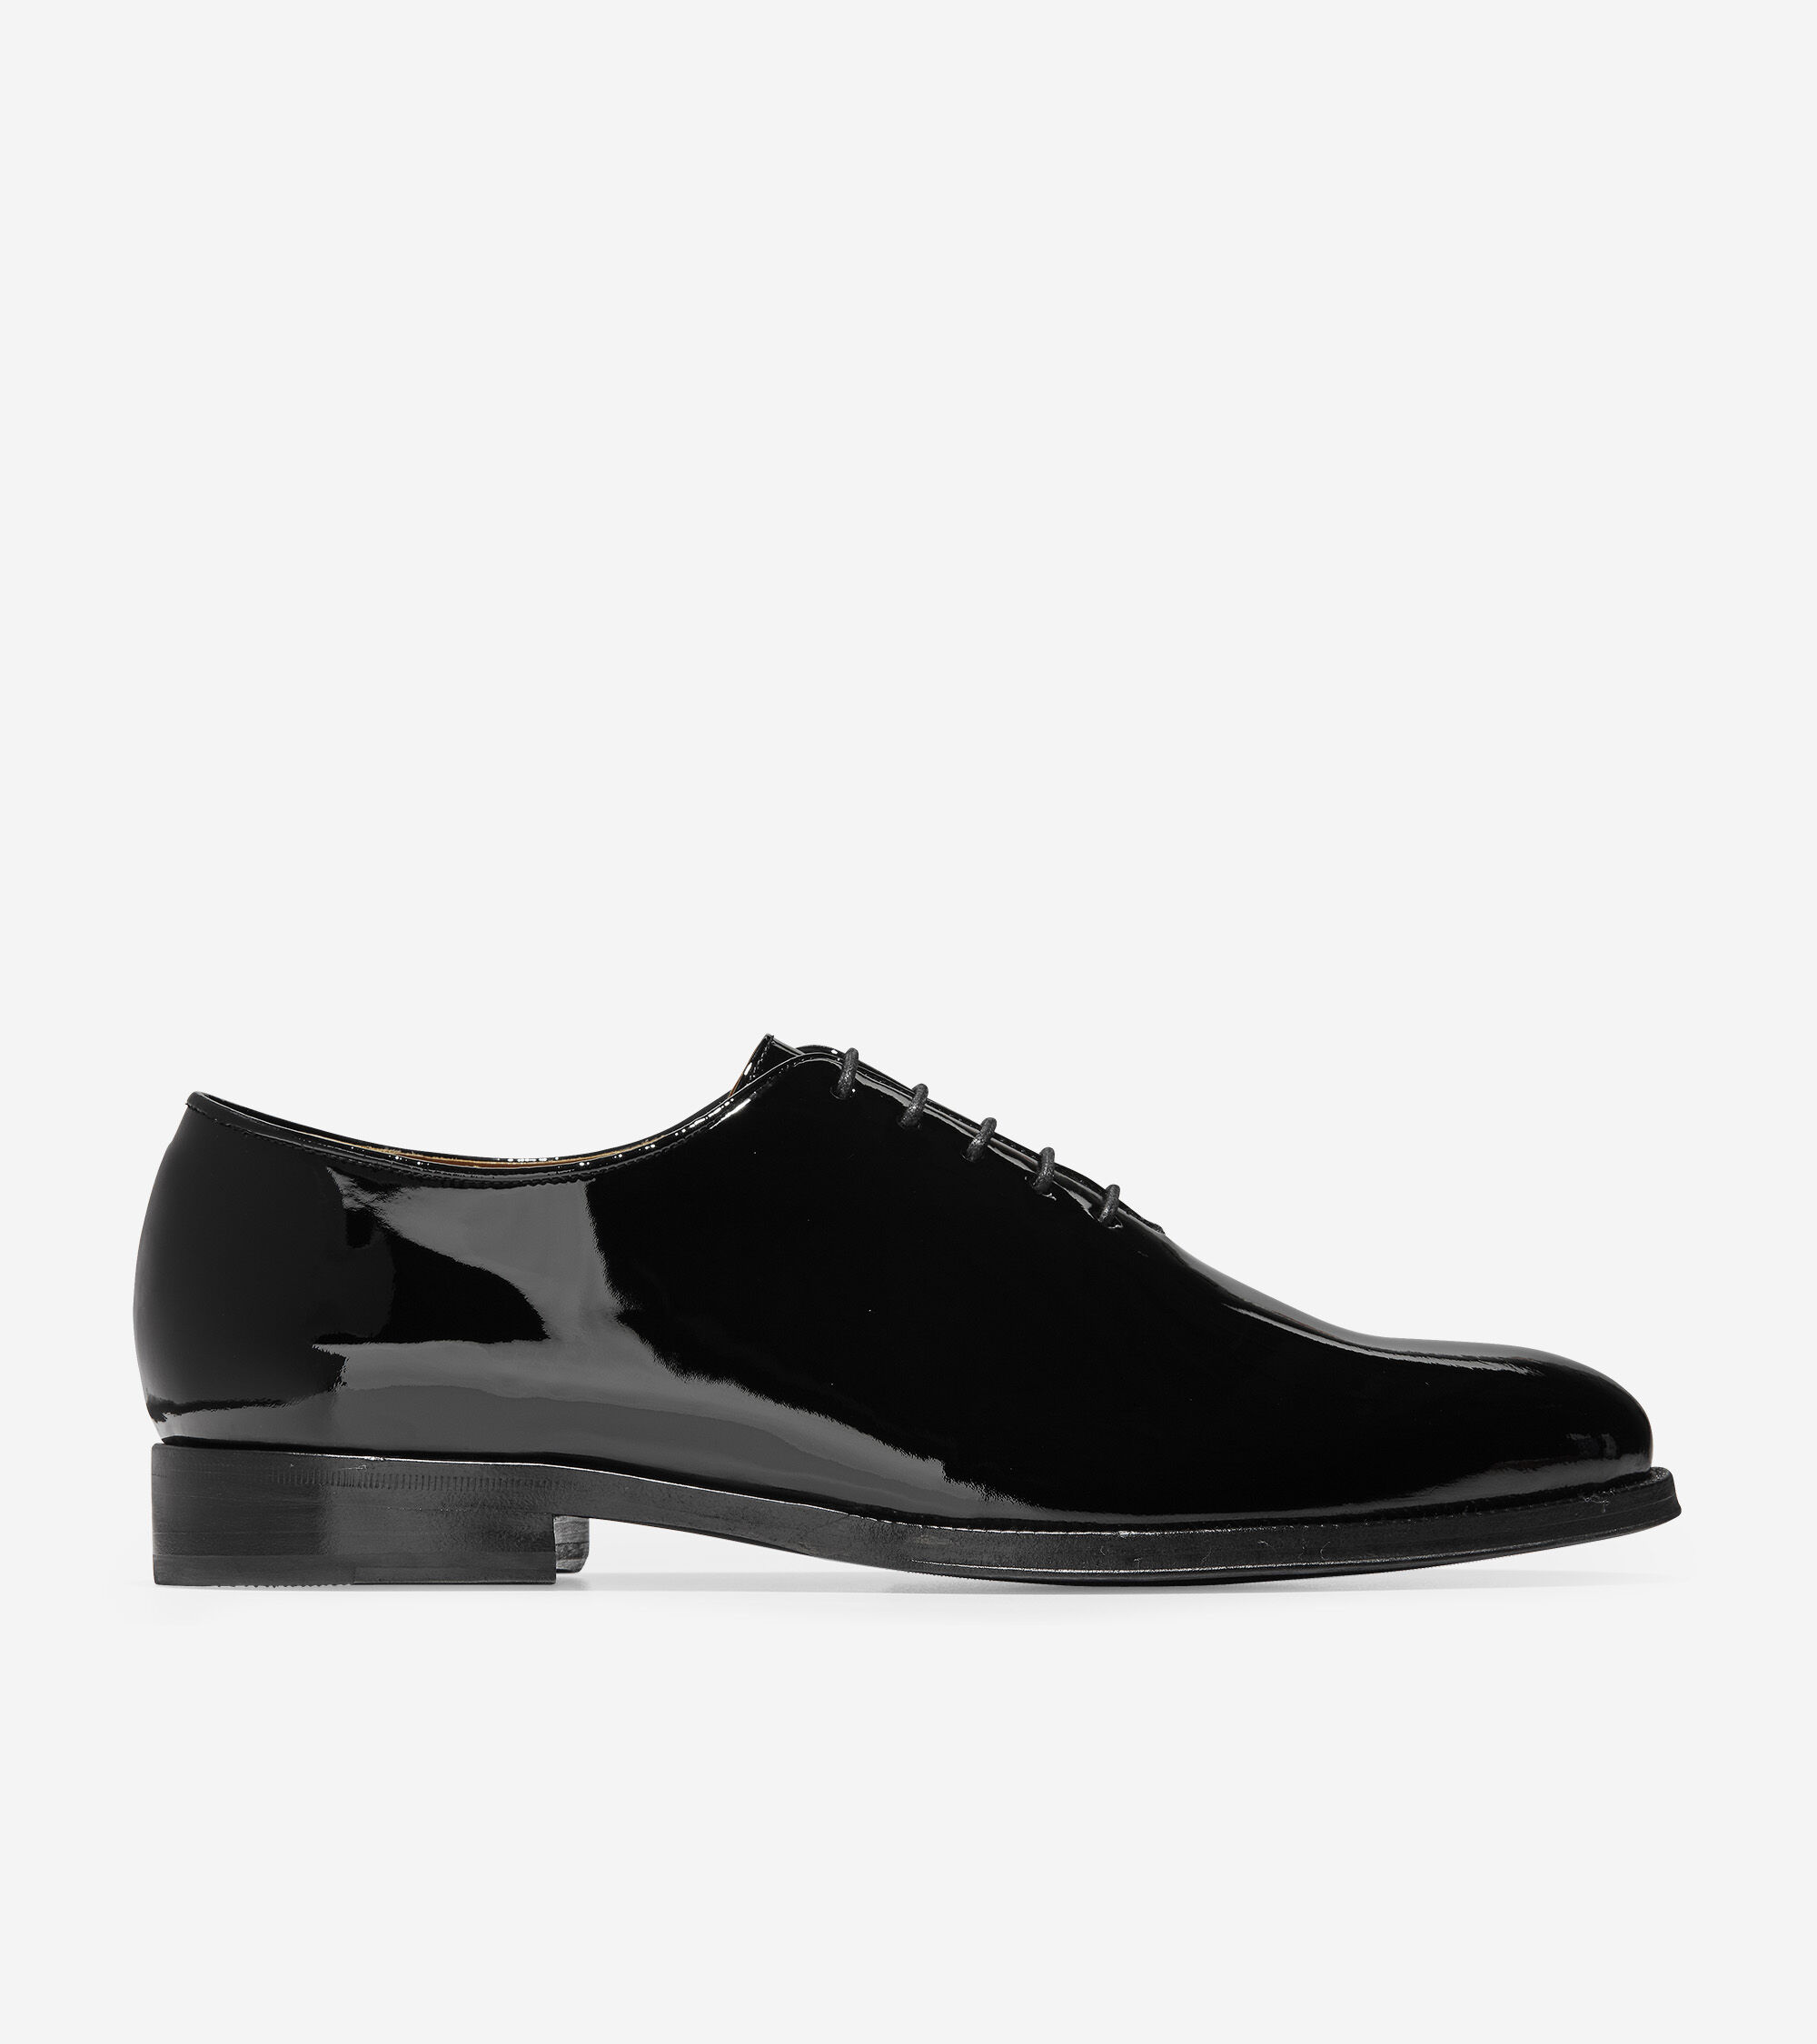 cole haan women's patent leather shoes